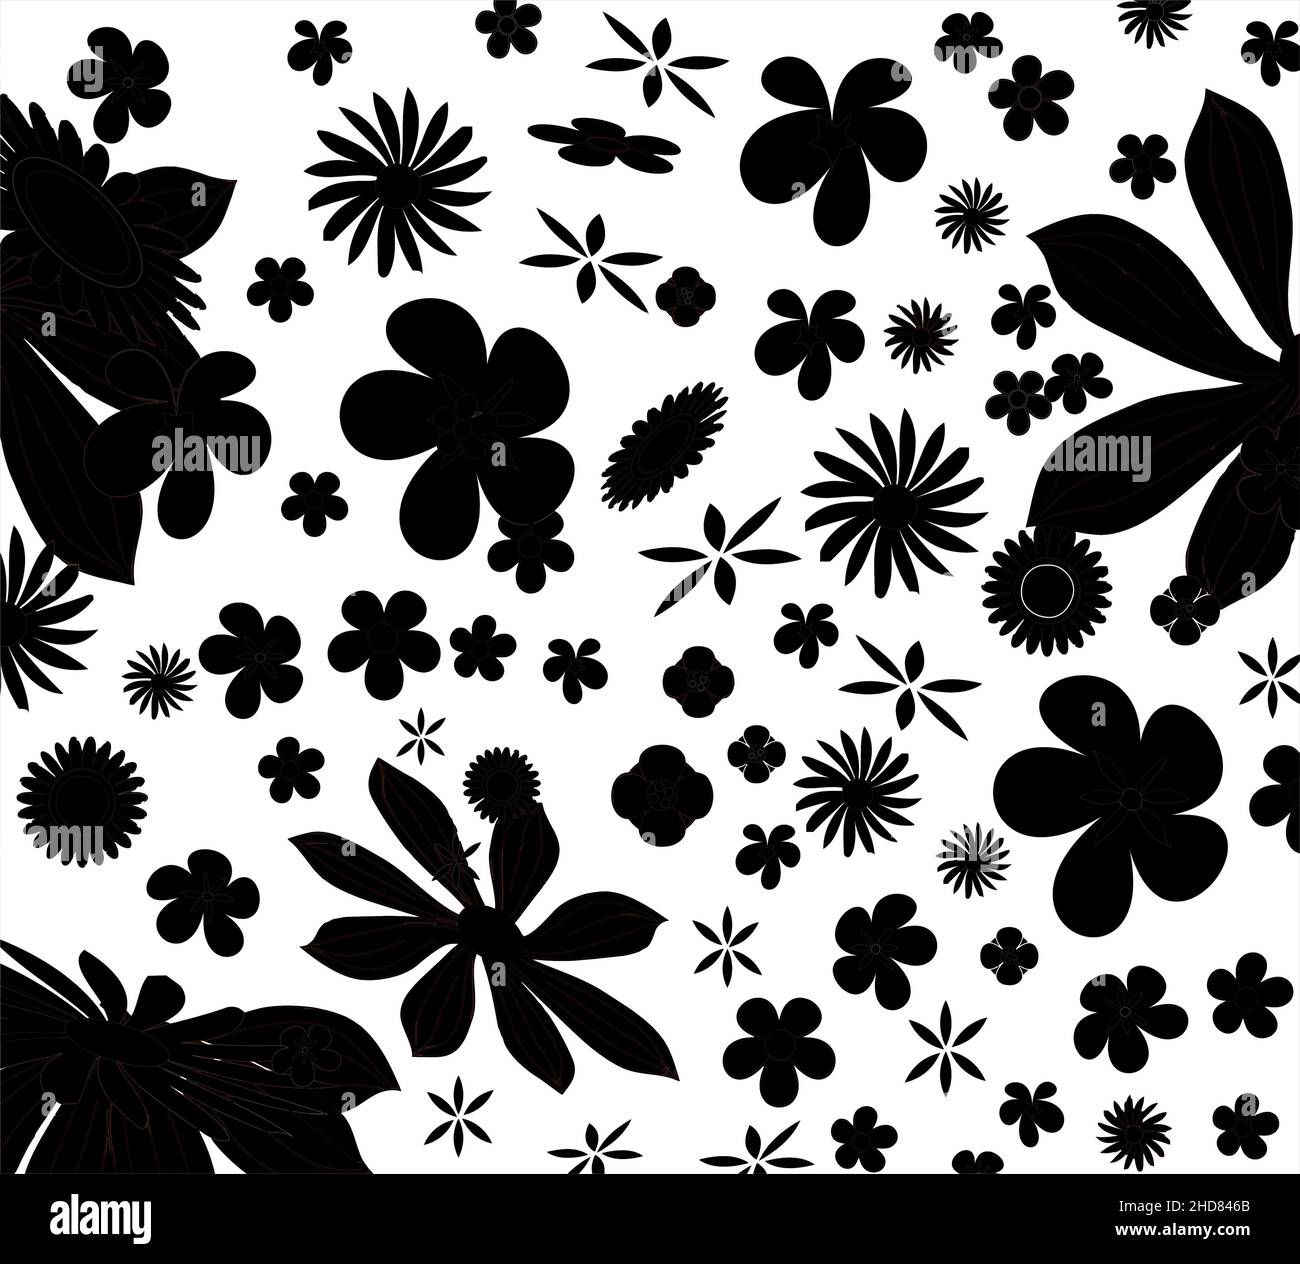 Black silhouettes floral pattern, Repeated flowers for prints, wallpapers, fabric print Stock Vector